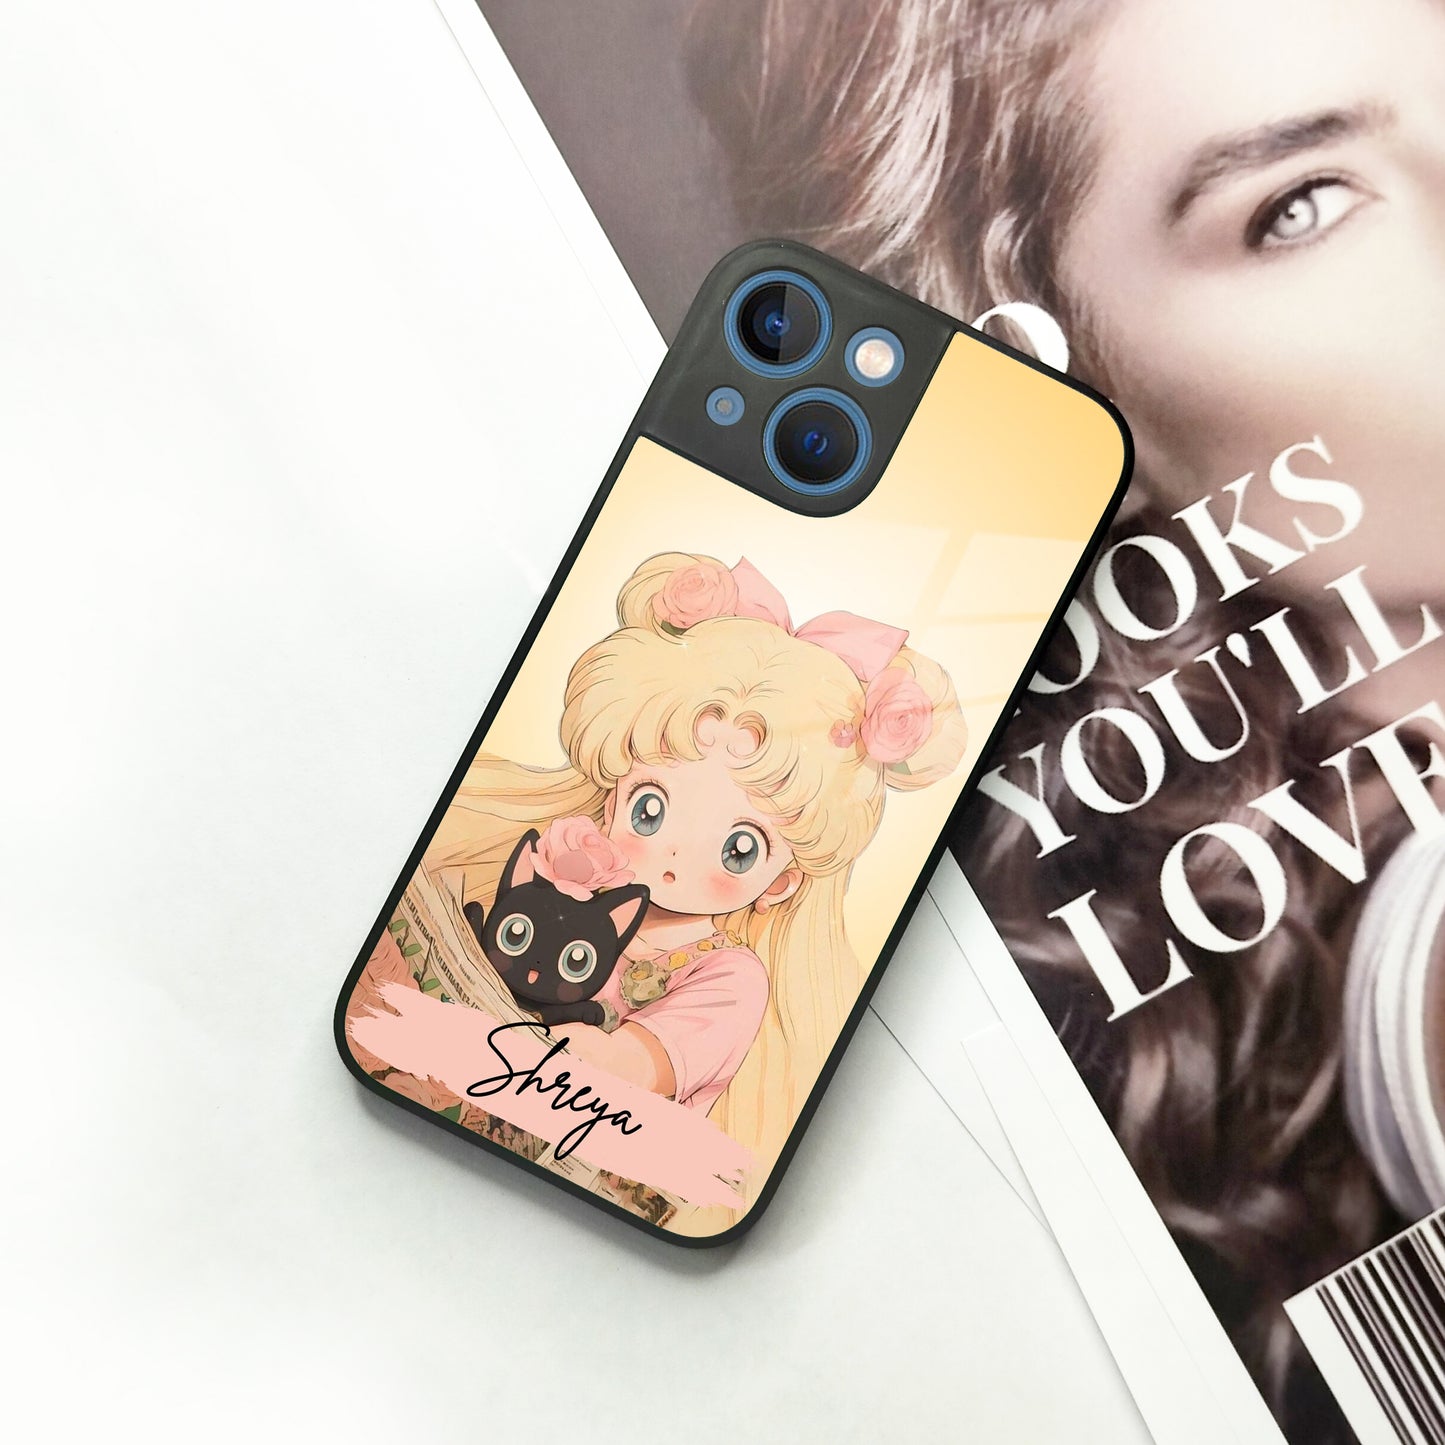 Lovely Sailor Moon Customize Glass Case Cover For iPhone